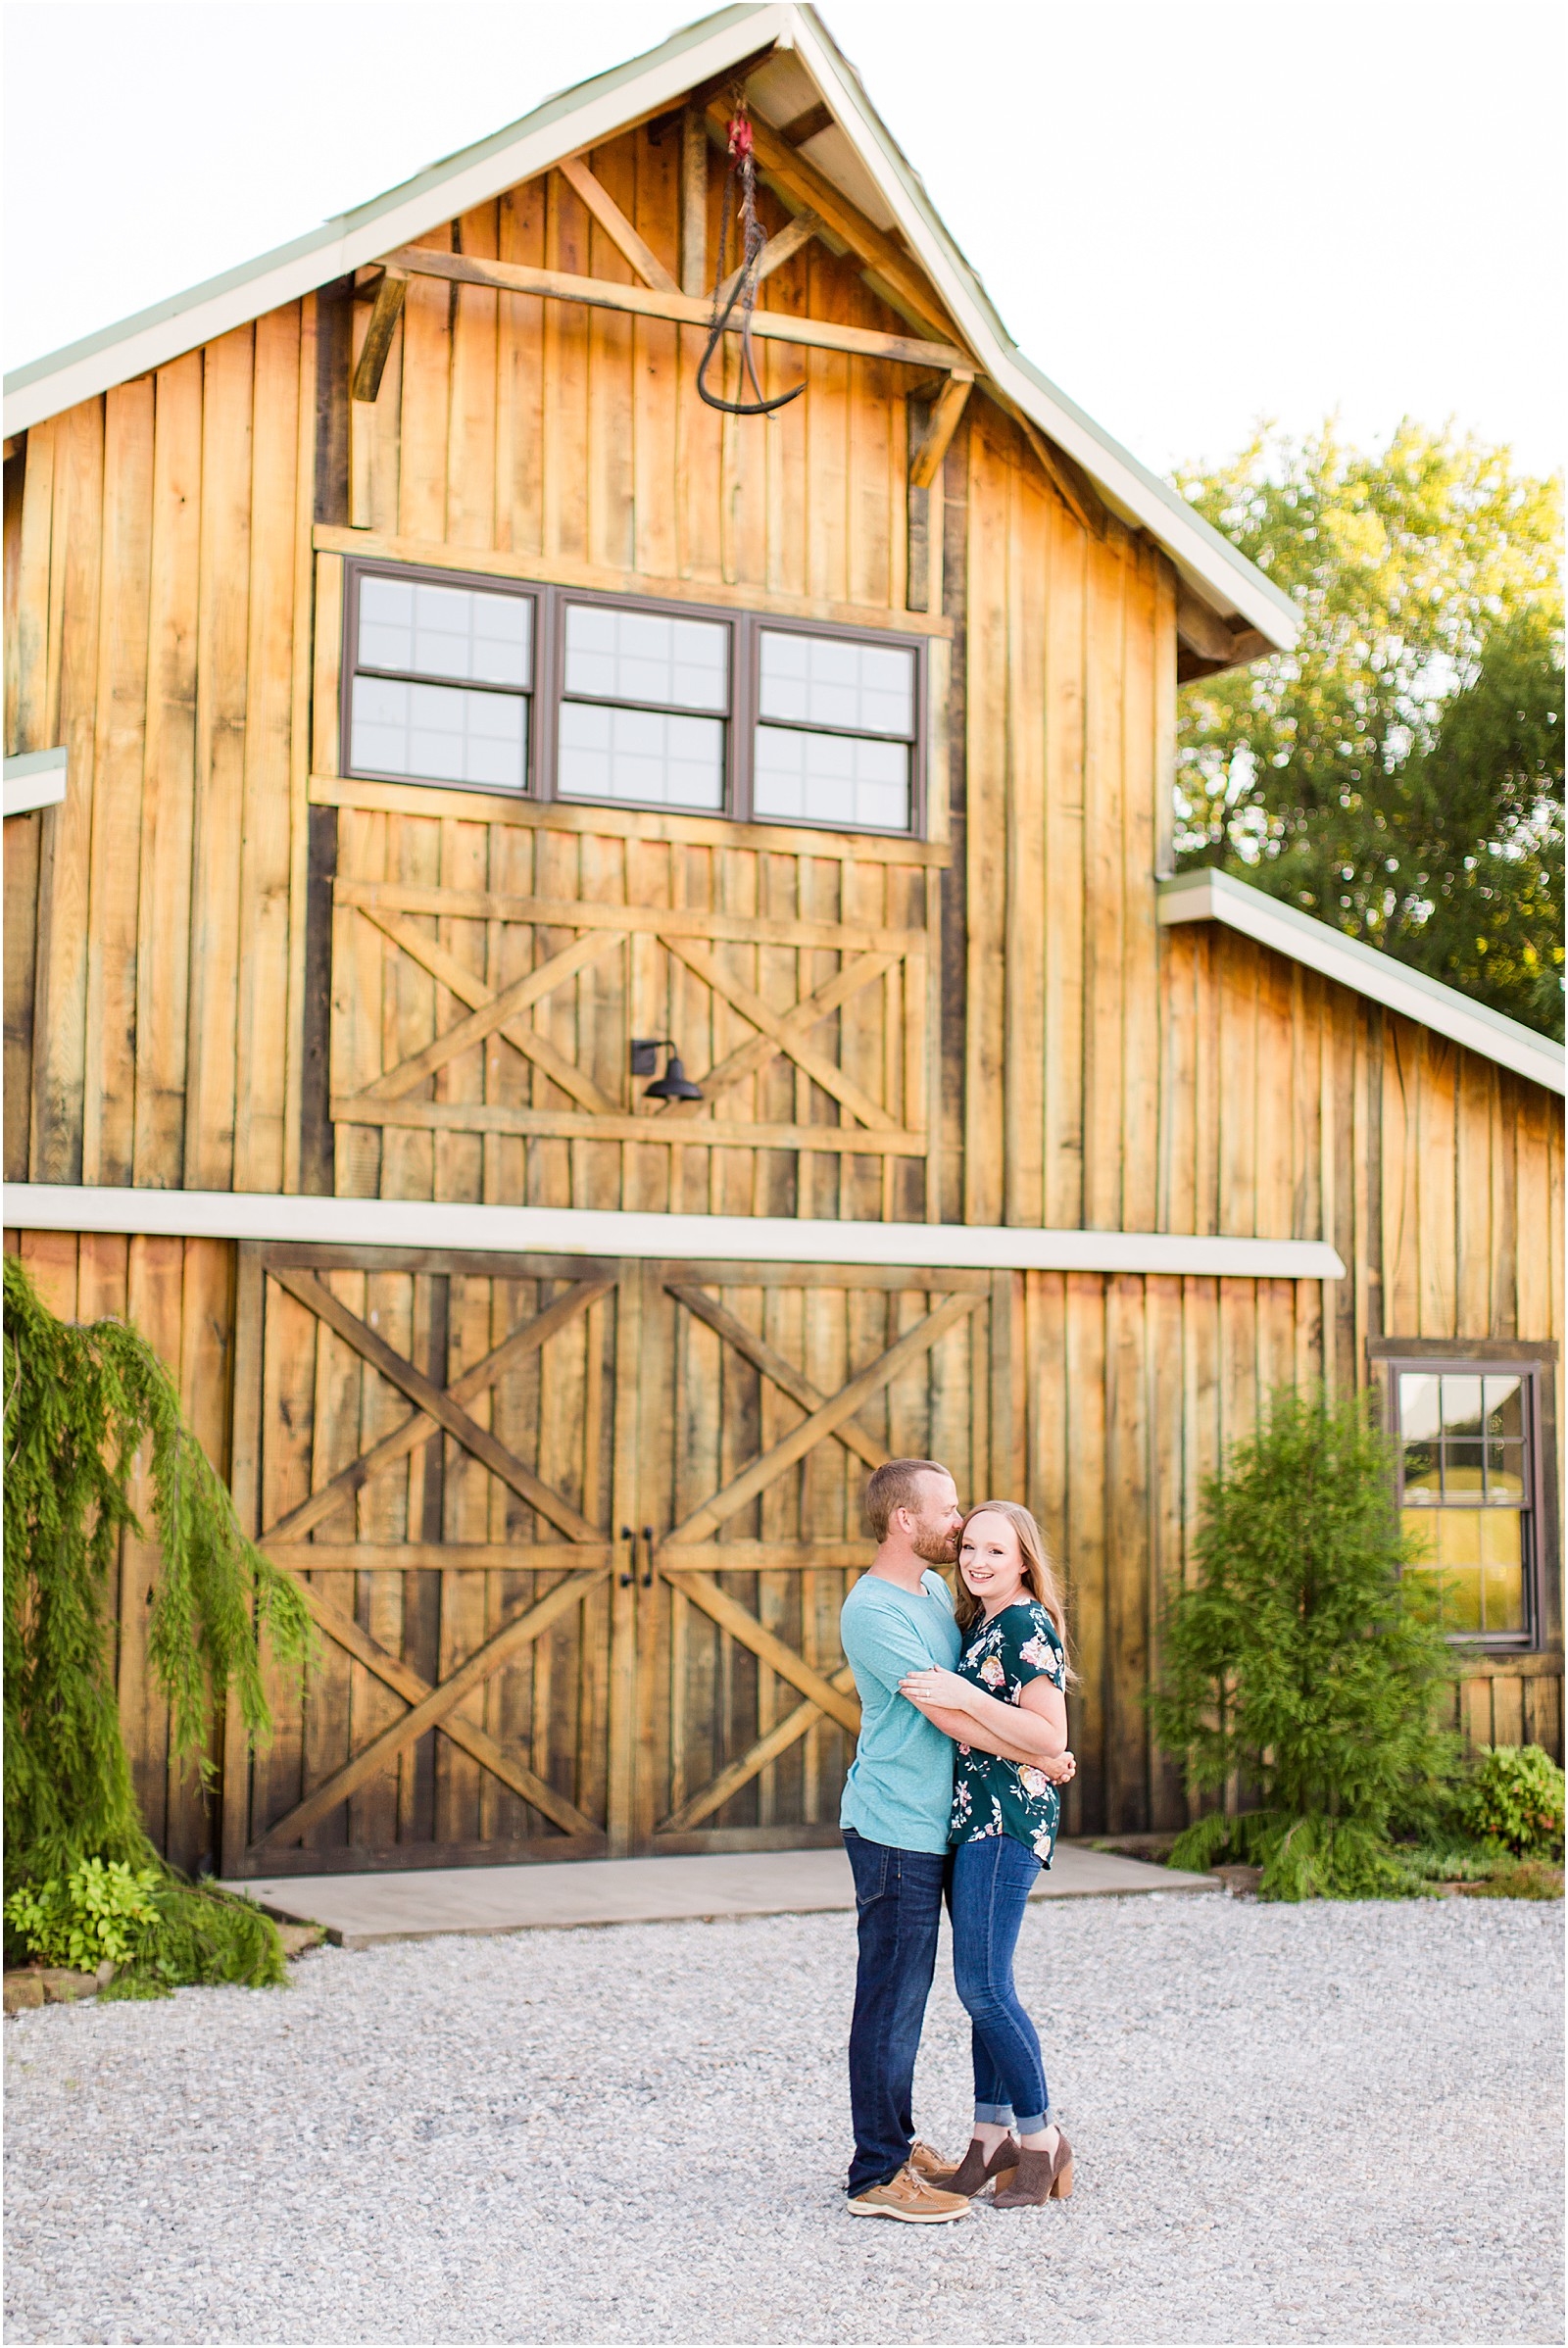 A Sweet and Sunny Corner House Engagement Session | Sierra and Eddie | Bret and Brandie Photography | | 0003.jpg